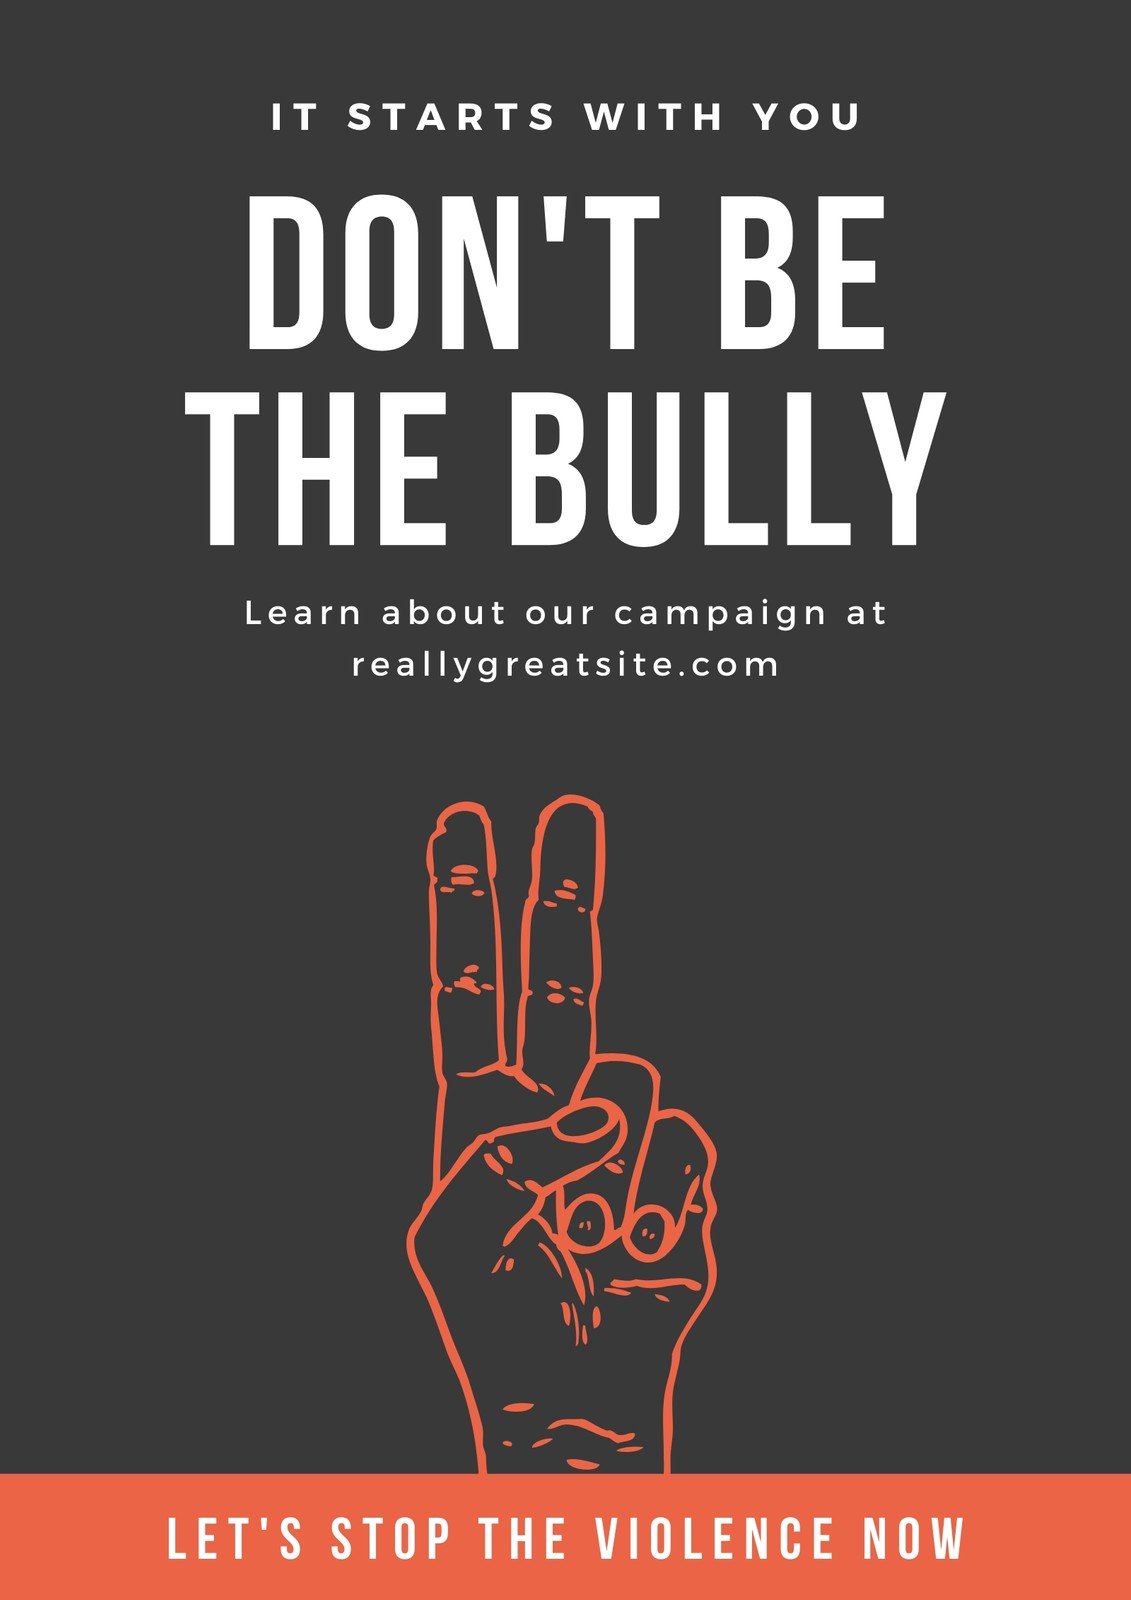 anti bullying pictures